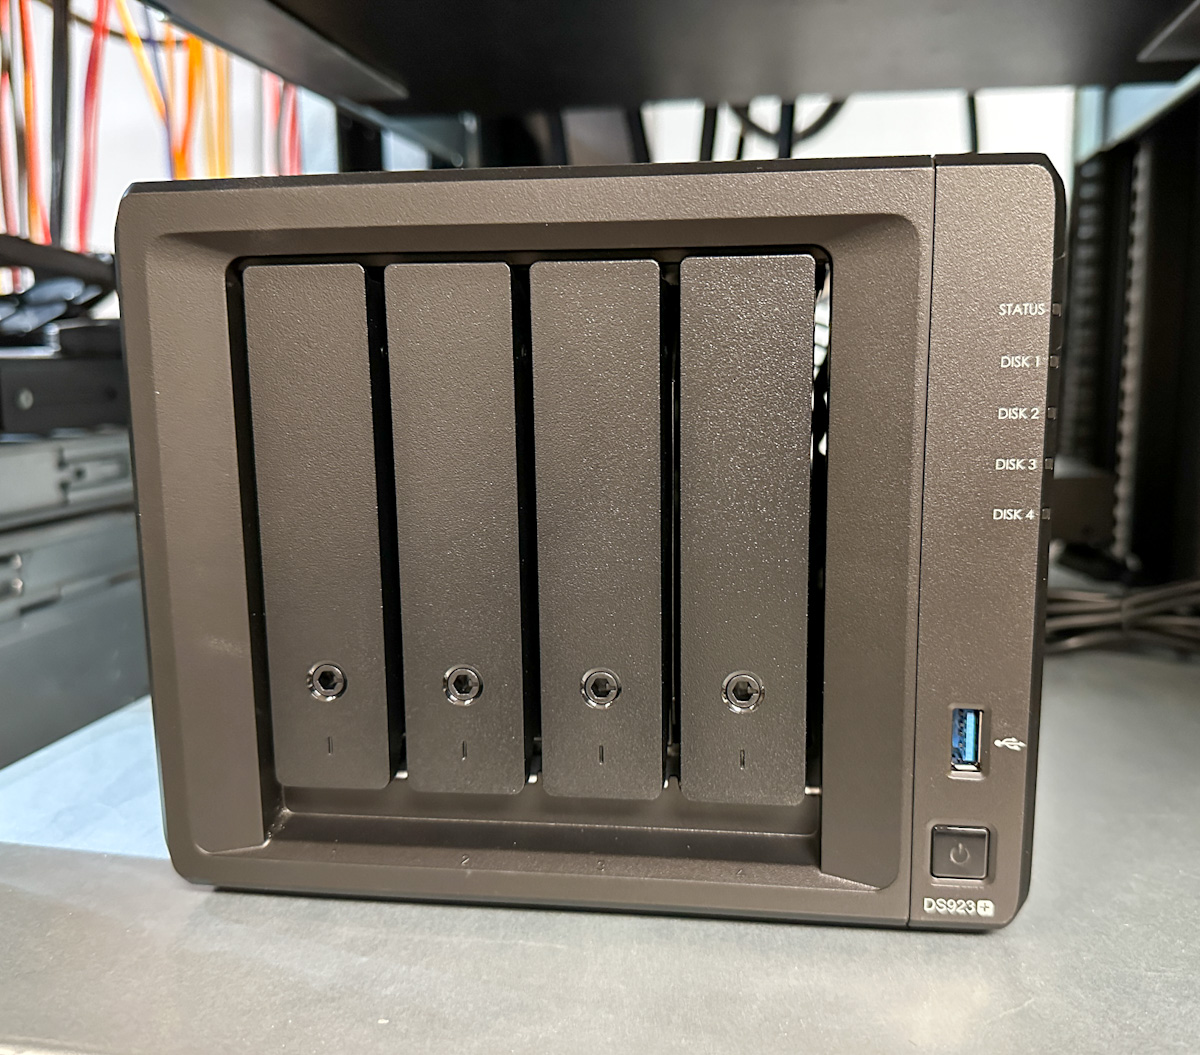 https://www.storagereview.com/wp-content/uploads/2022/12/StorageReview-Synology-DS923-Plus-2.jpg